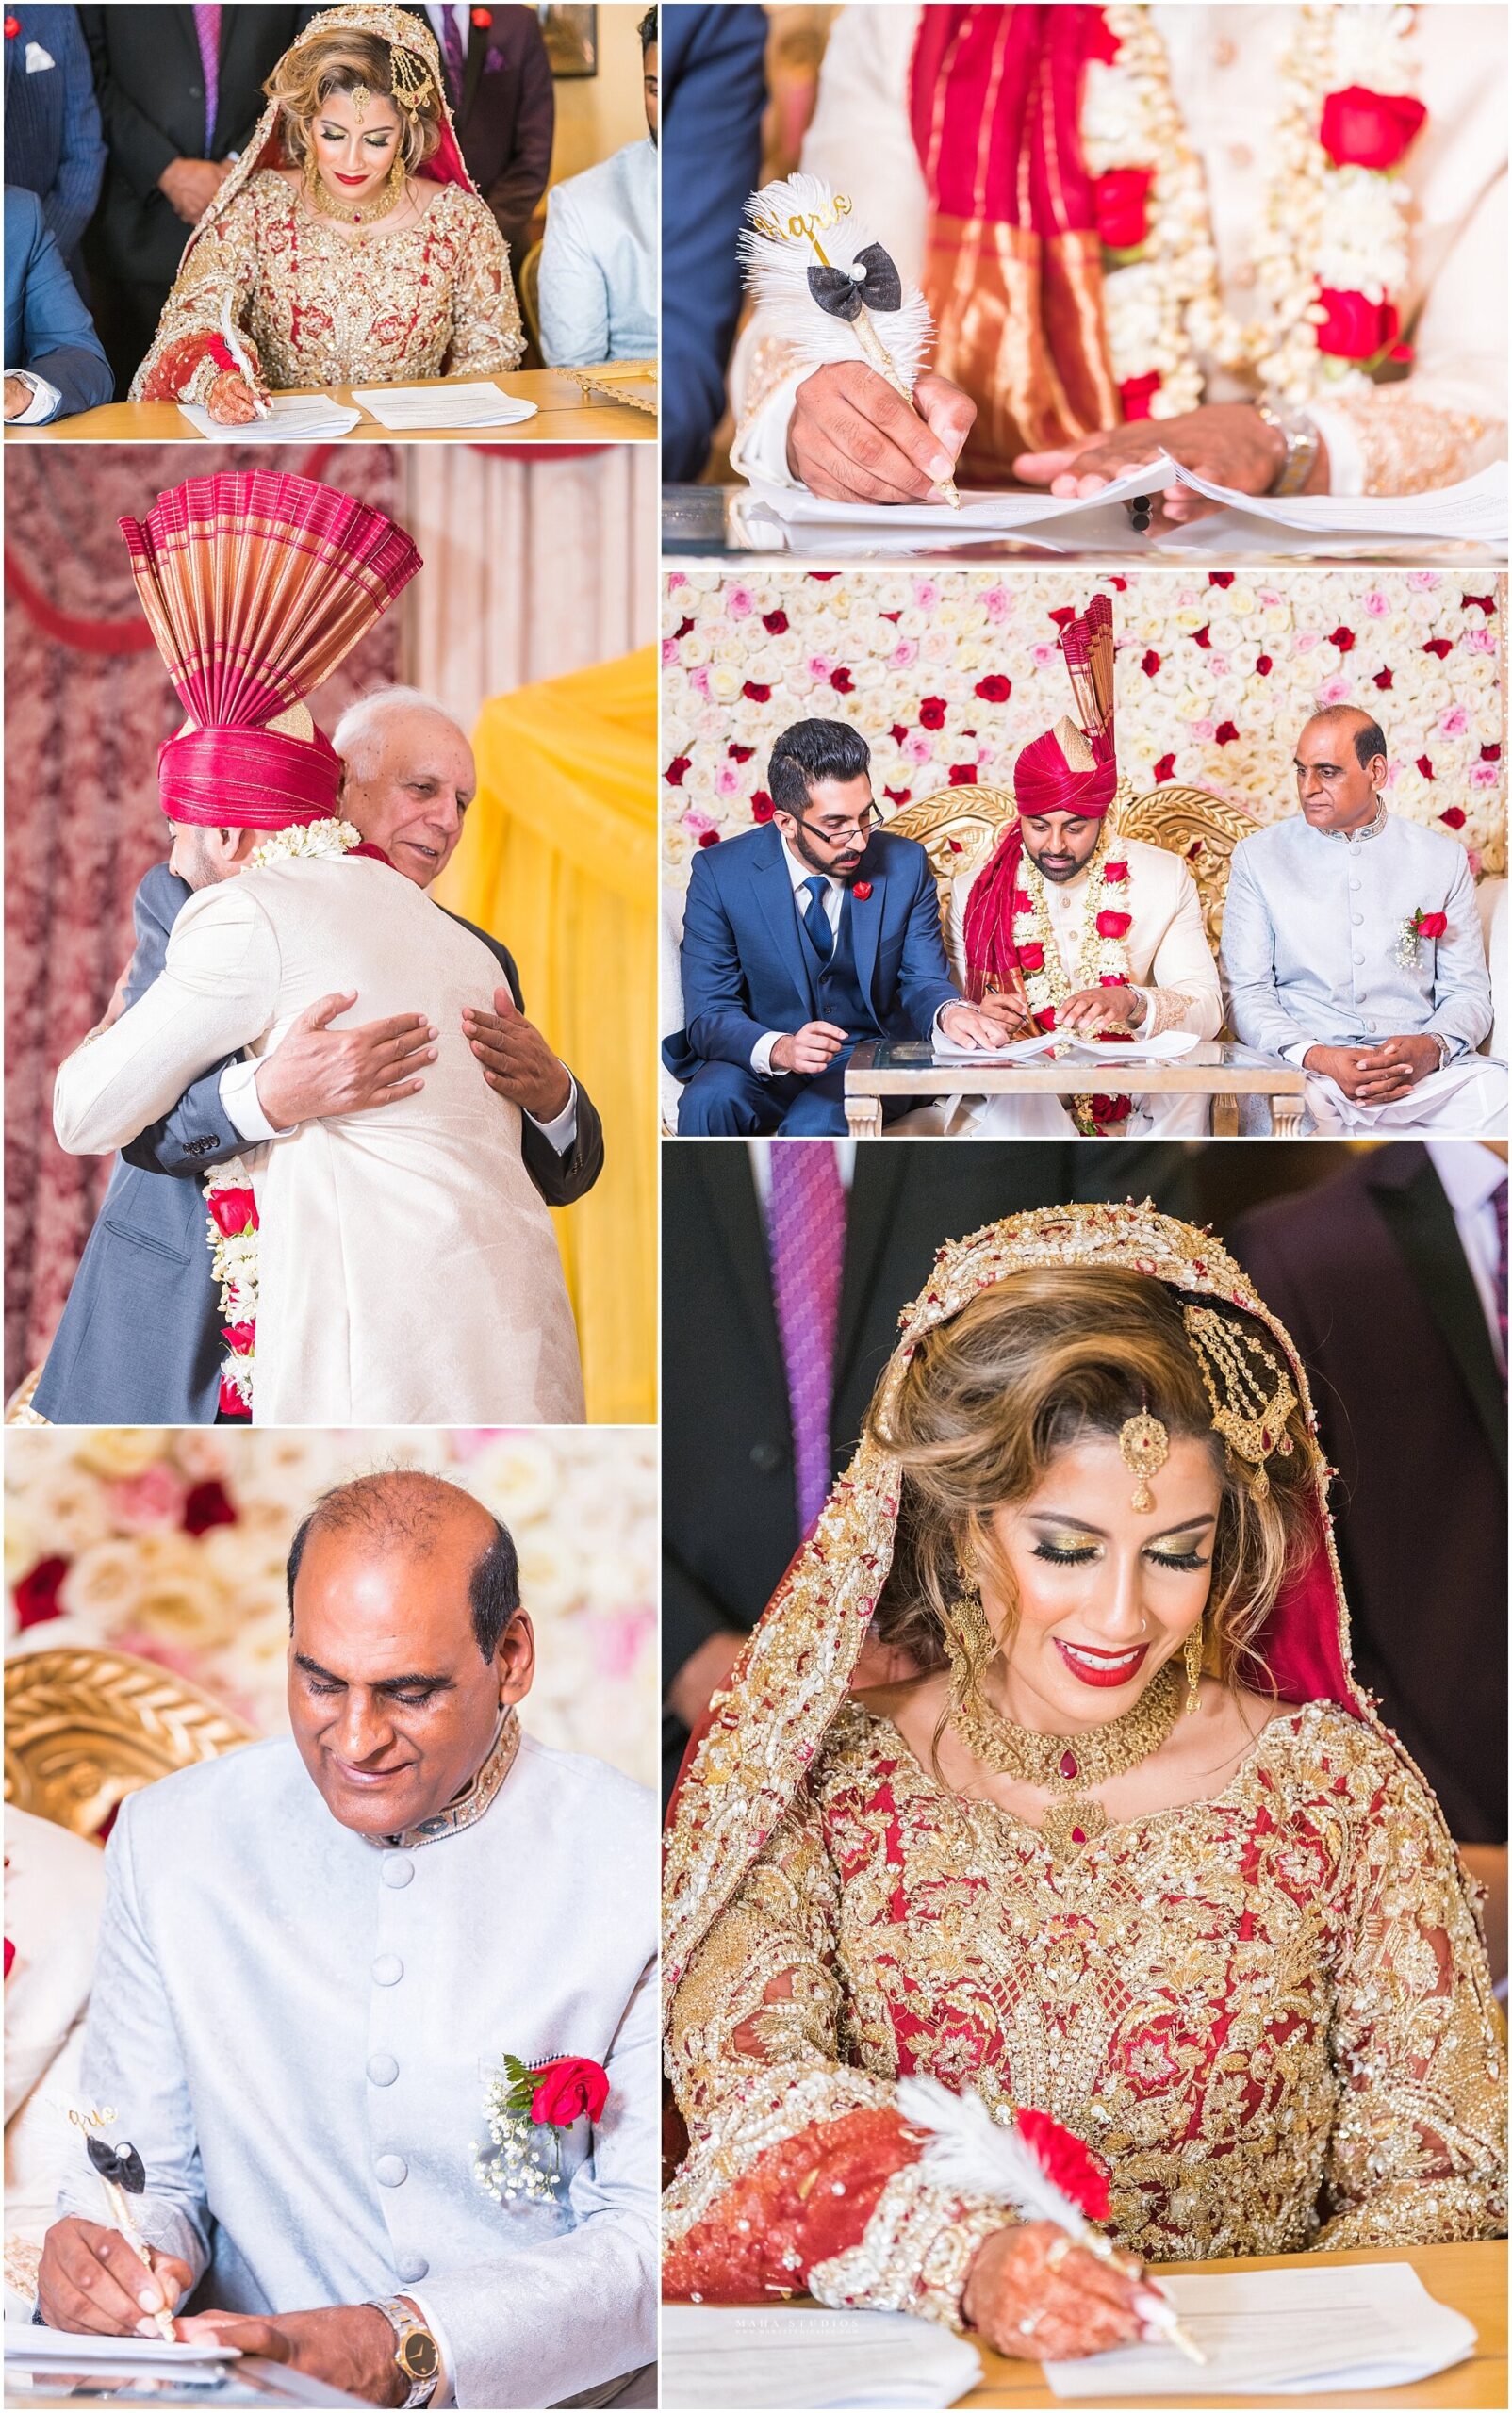 Nikkah ceremony, a muslim marriage, photographed by Maha Studios